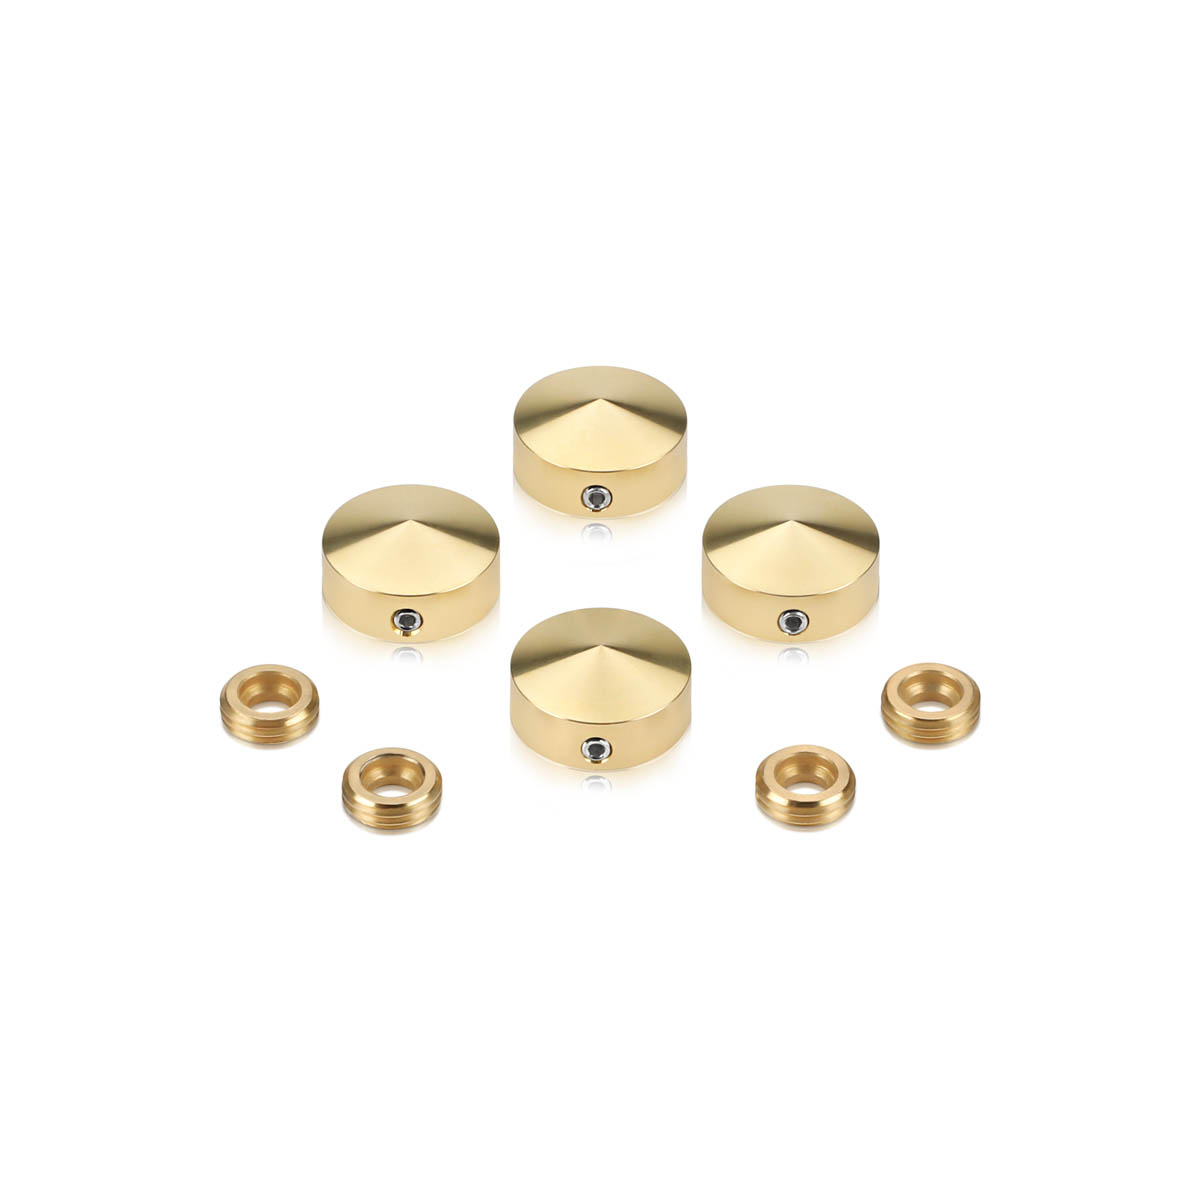 Set of 4 Conical Locking Screw Cover, Diameter: 11/16'' (Less 3/4'') Brass Plain Finish (Indoor or Outdoor Use, but for outdoor use Brass will come darker if no varnish applied)